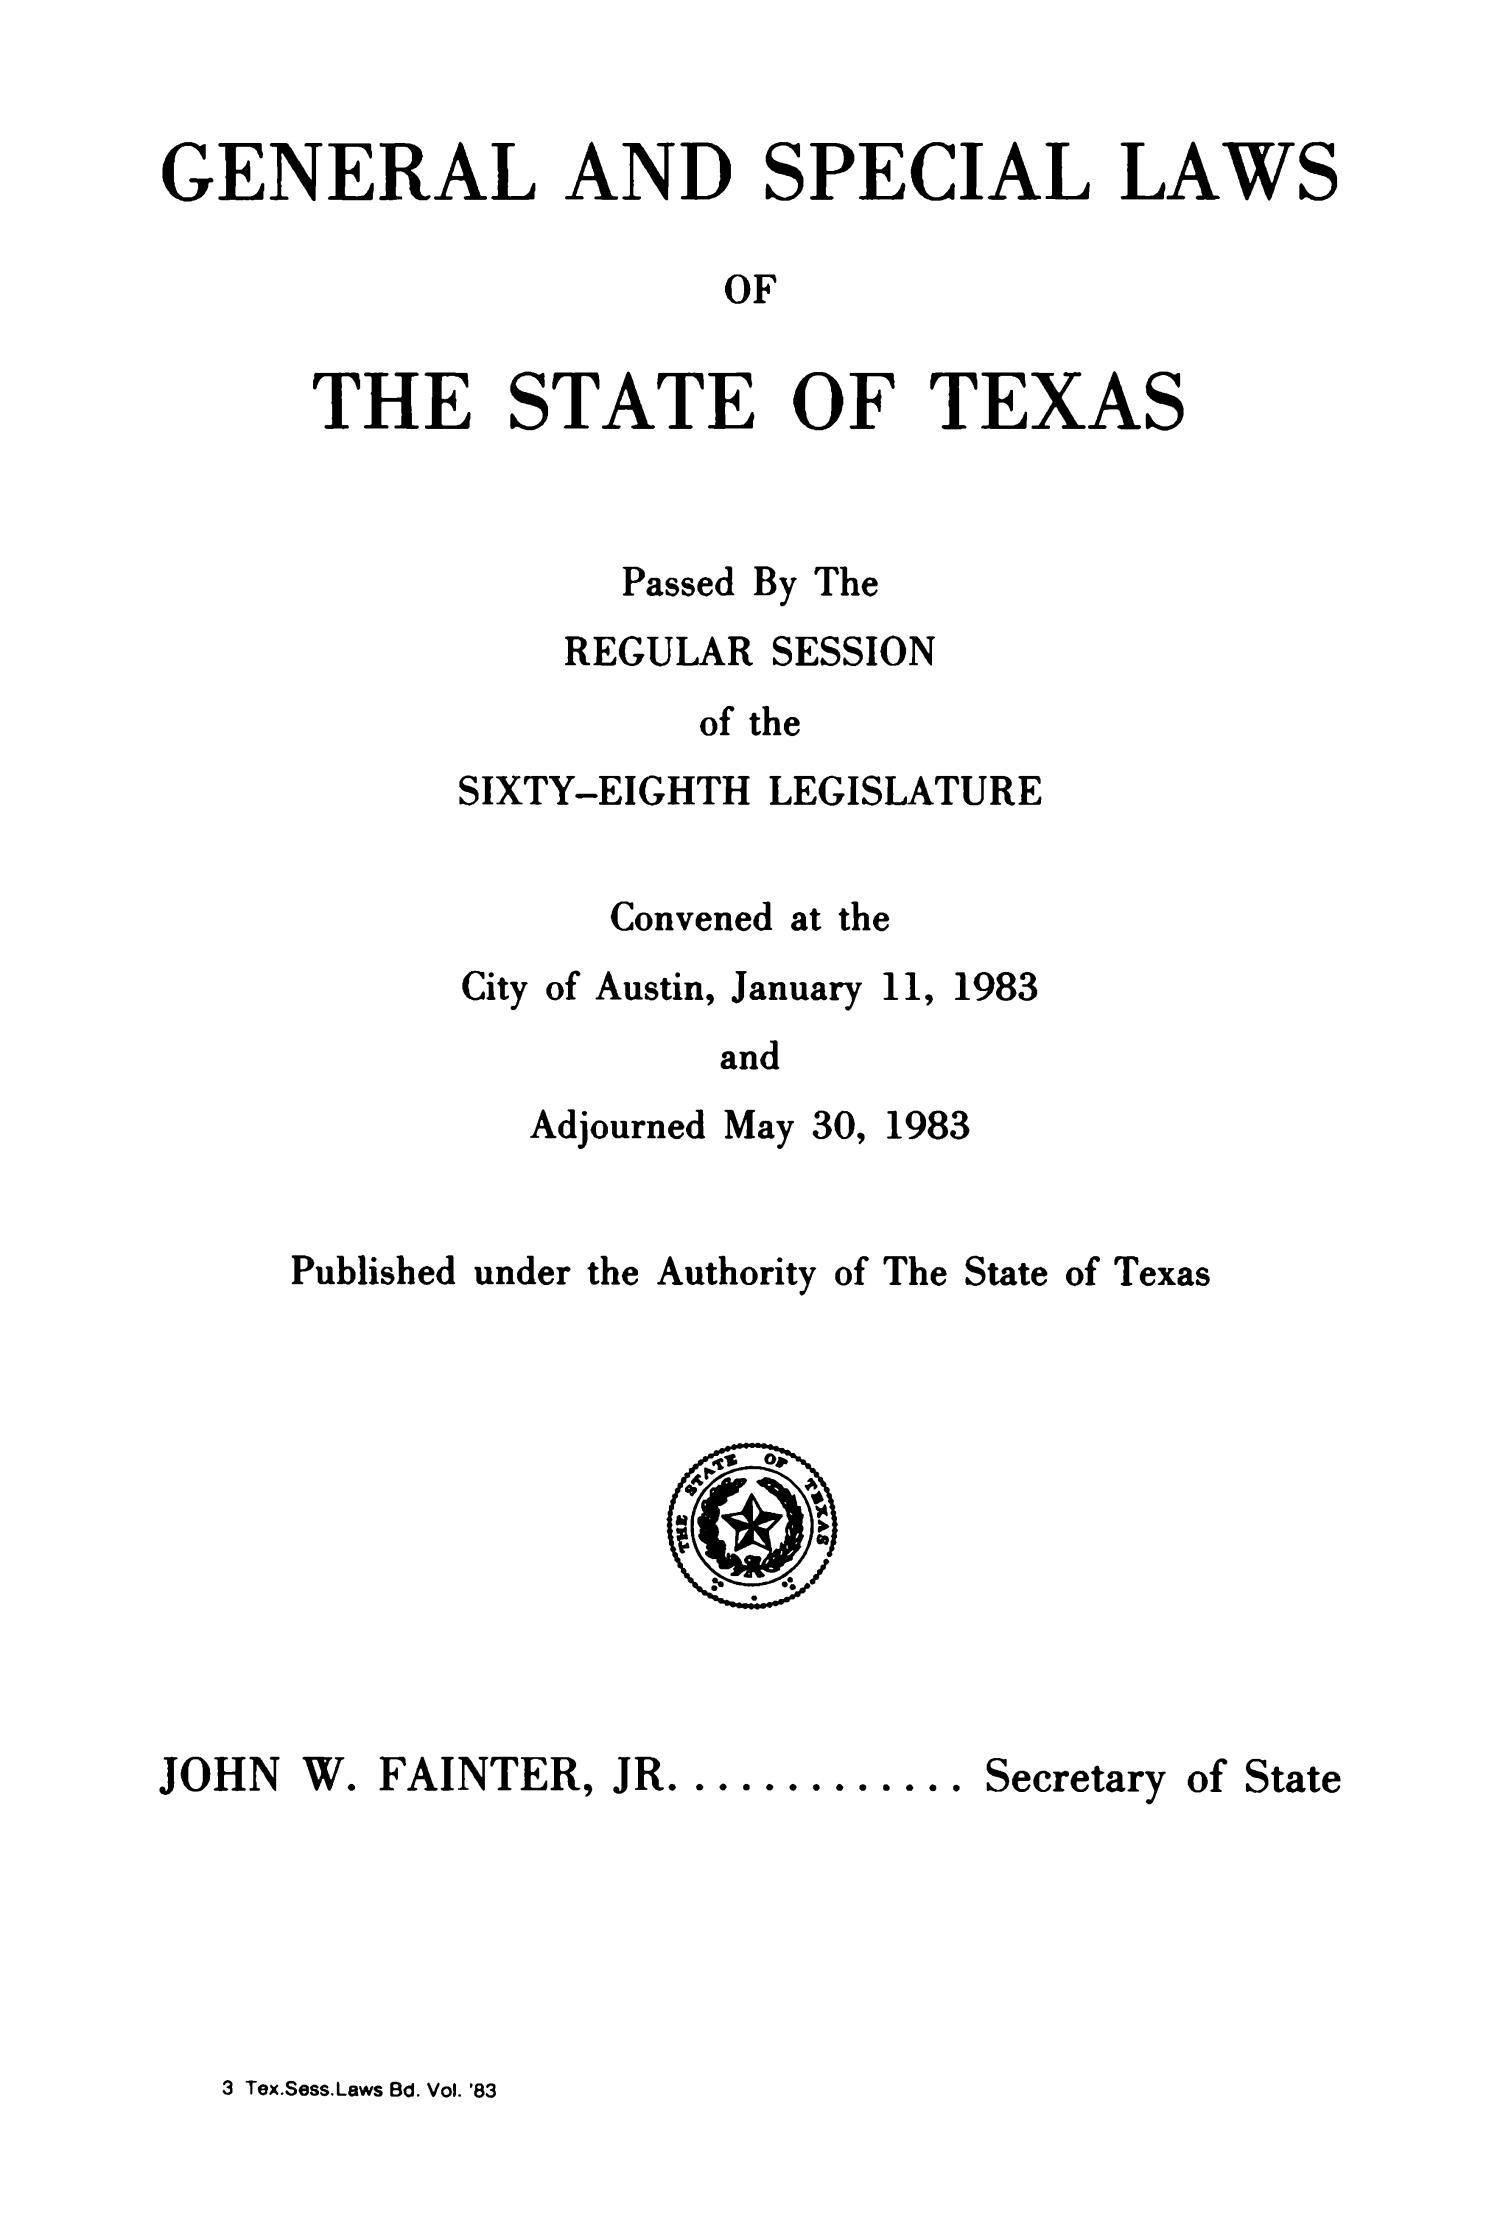 General and Special Laws of The State of Texas Passed By The Regular Session and The First Called Session of the Sixty-Eighth Legislature
                                                
                                                    tp
                                                